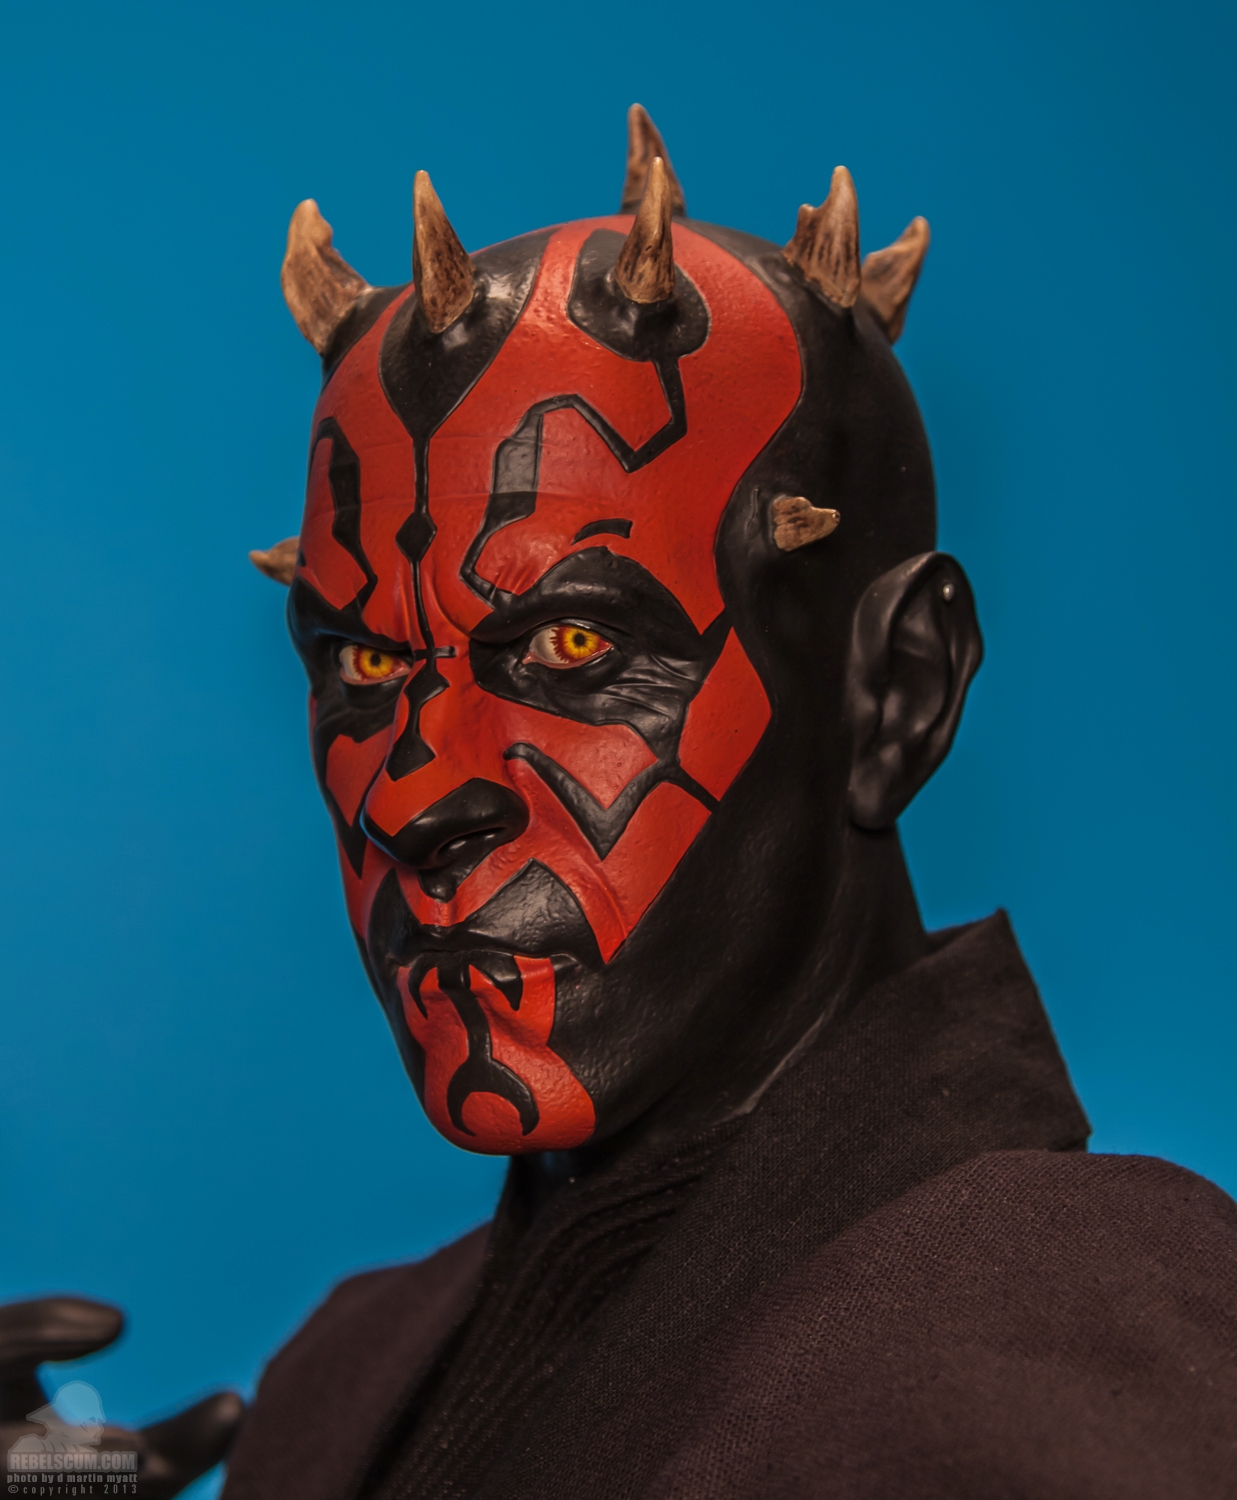 Darth_Maul_Legendary_Scale_Figure_Sideshow_Collectibles-15.jpg